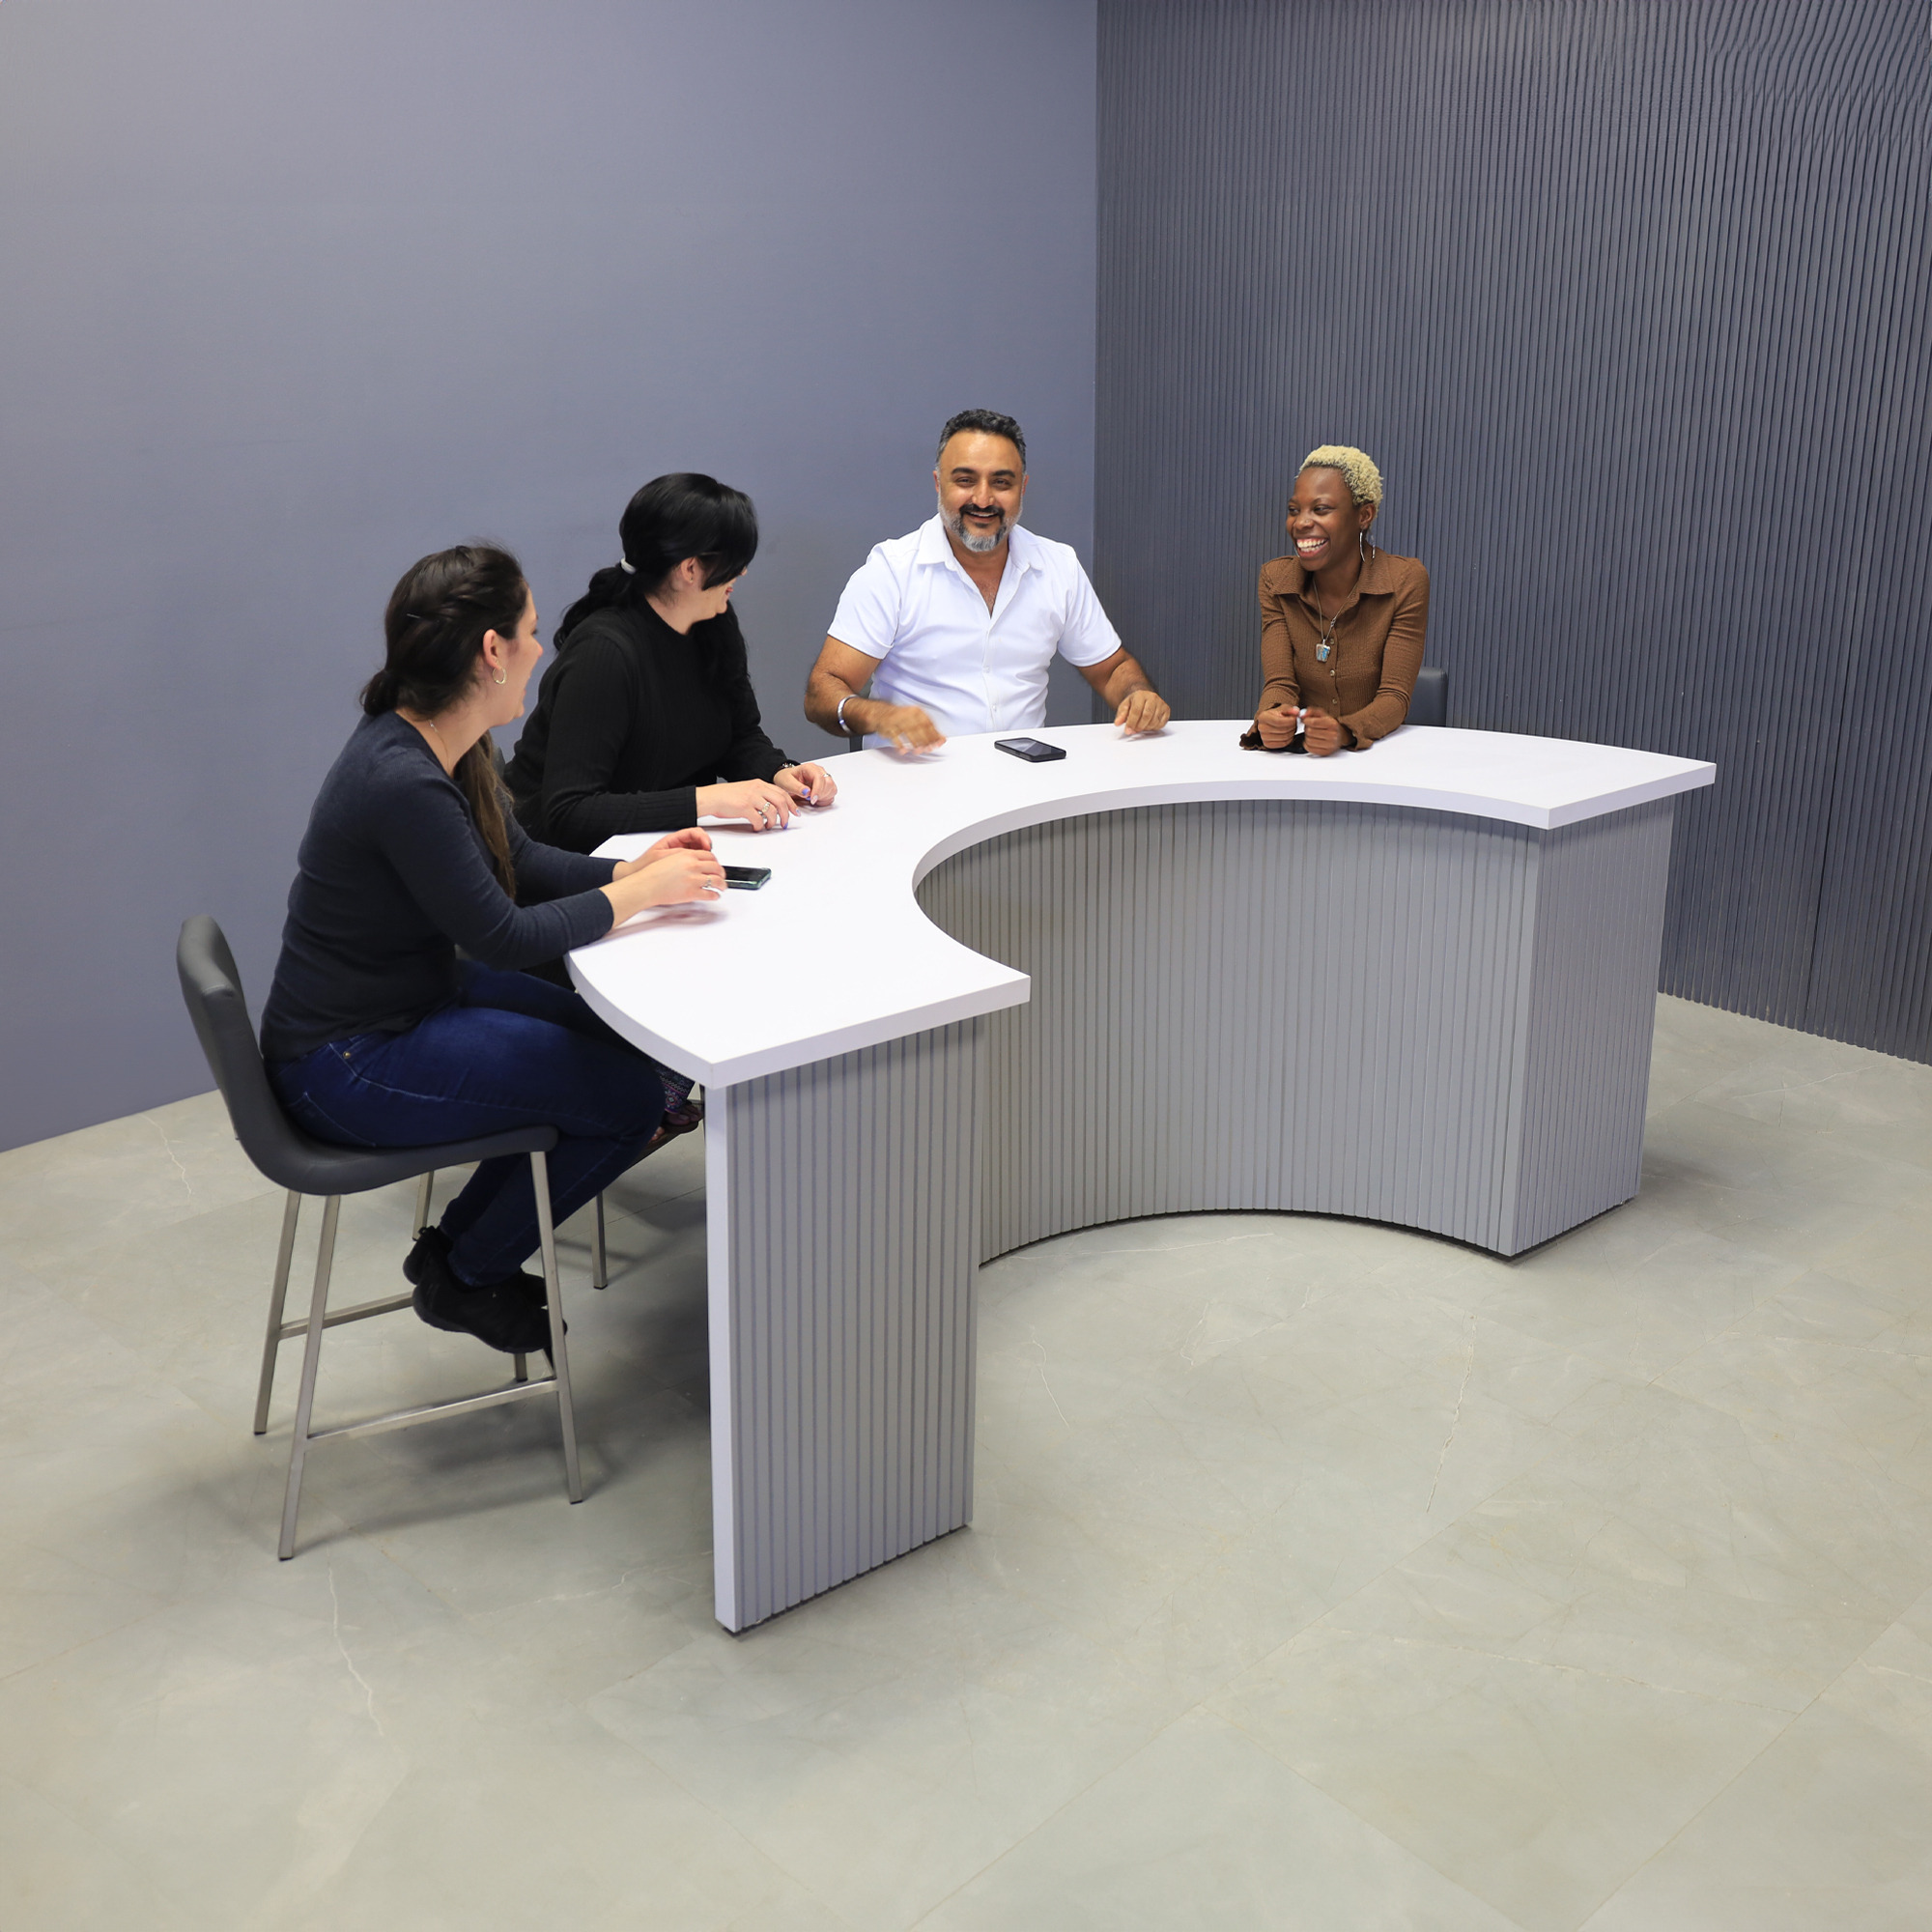 90-inch Handmade Custom Modern Podcast Table Half Moon in white matte laminate top and fog gray tambour base, shown here.